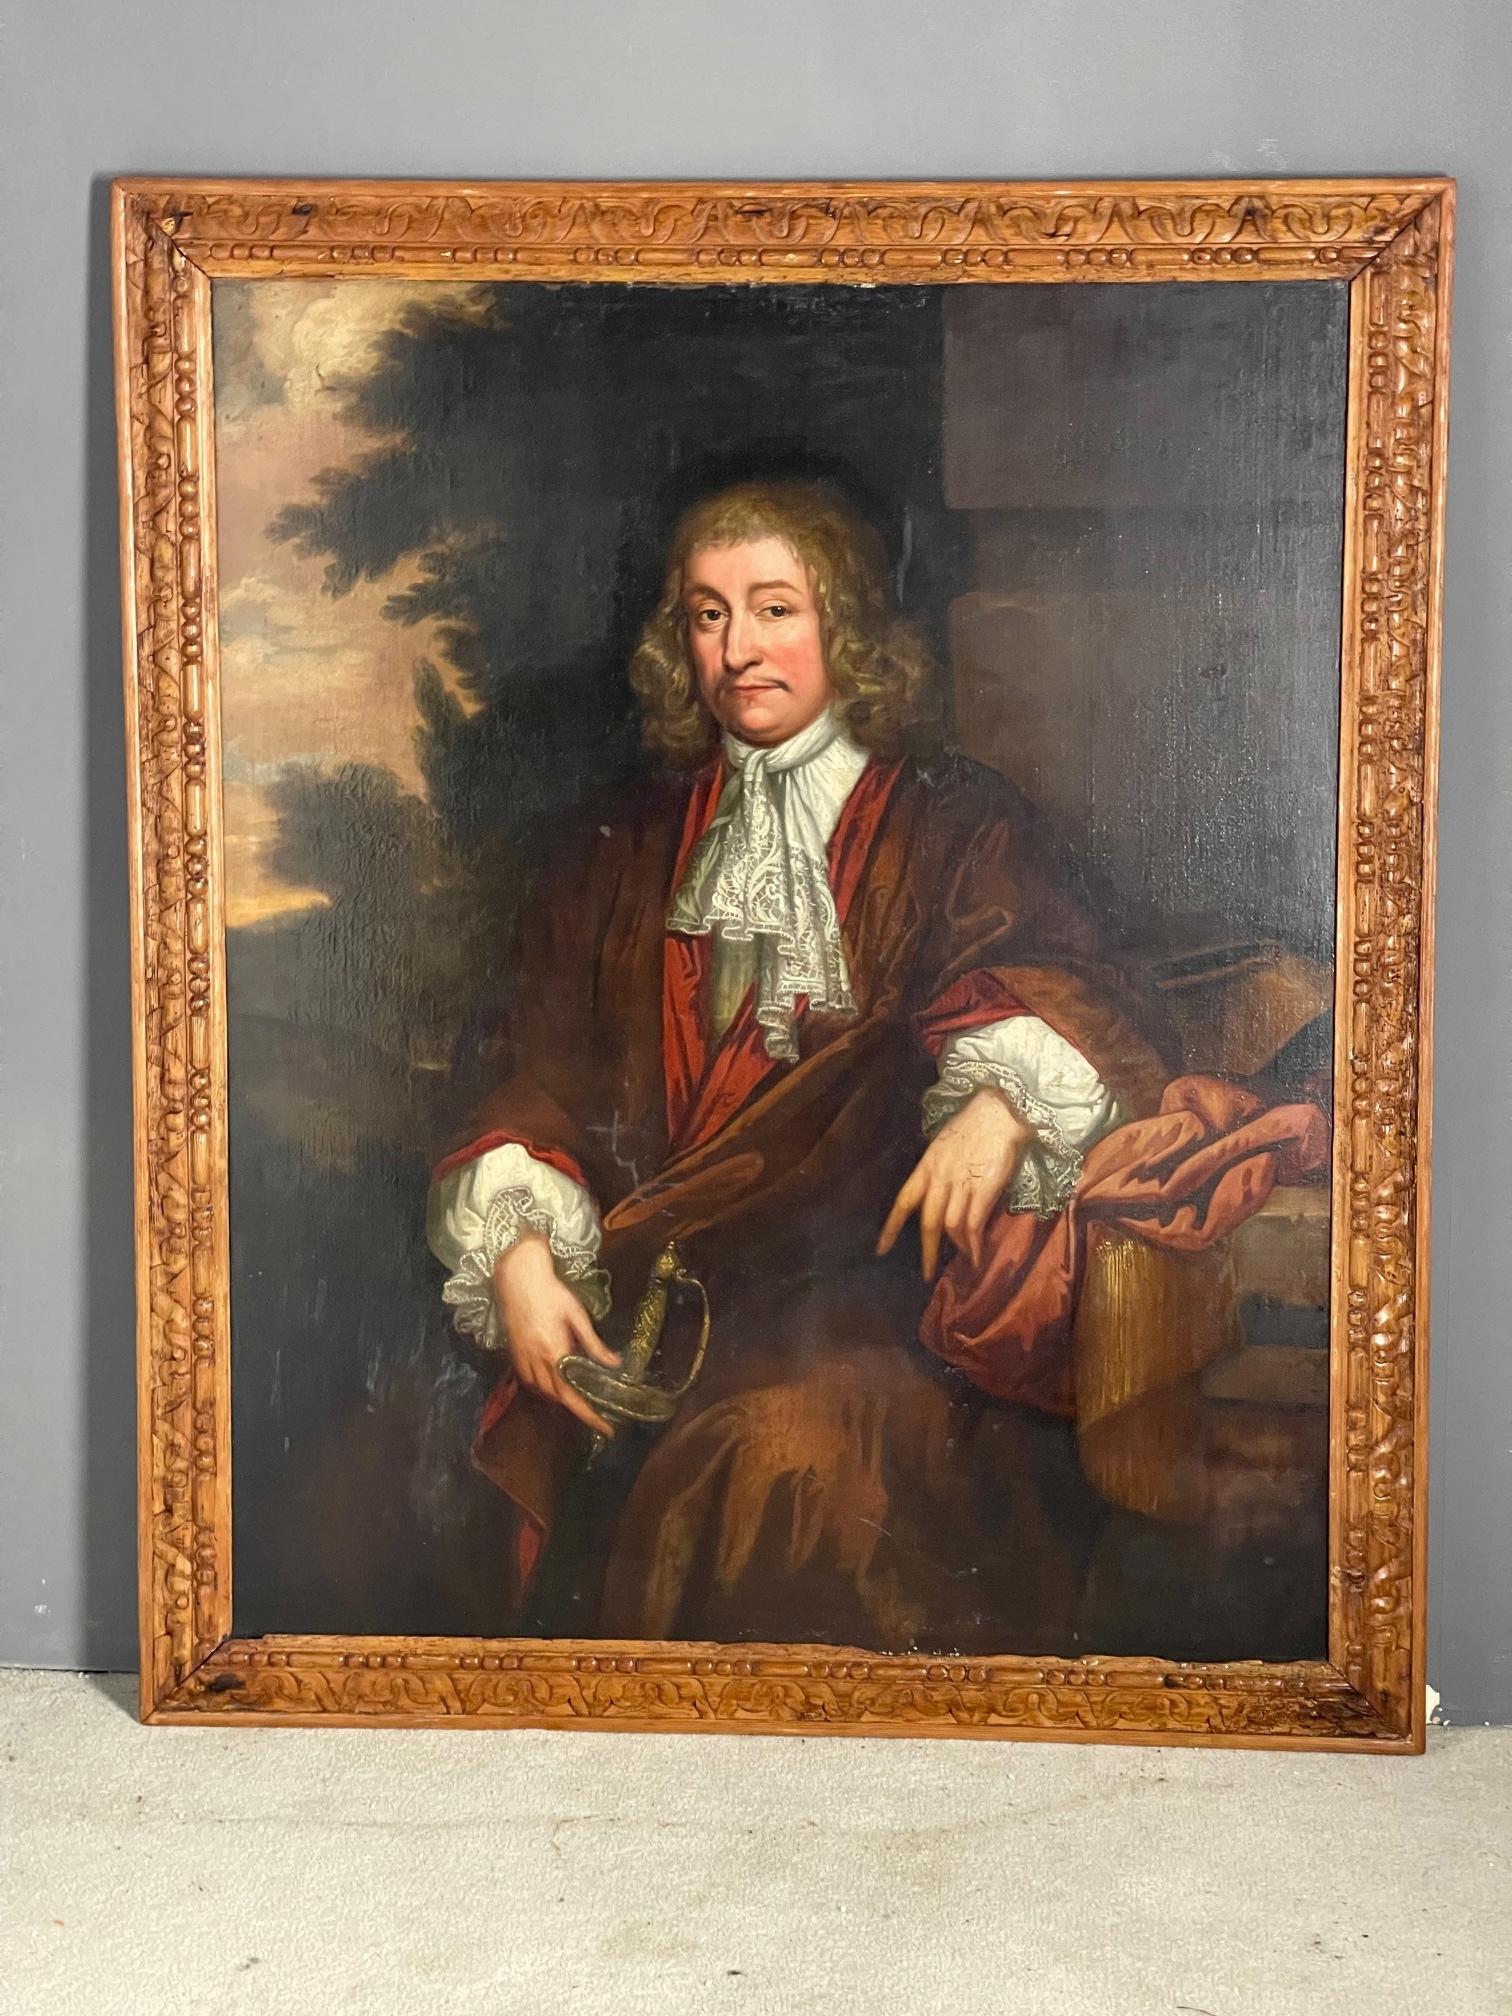 17th Century oil on canvas Josiah Childs attributed to John Riley

138 x 116cms In original frame